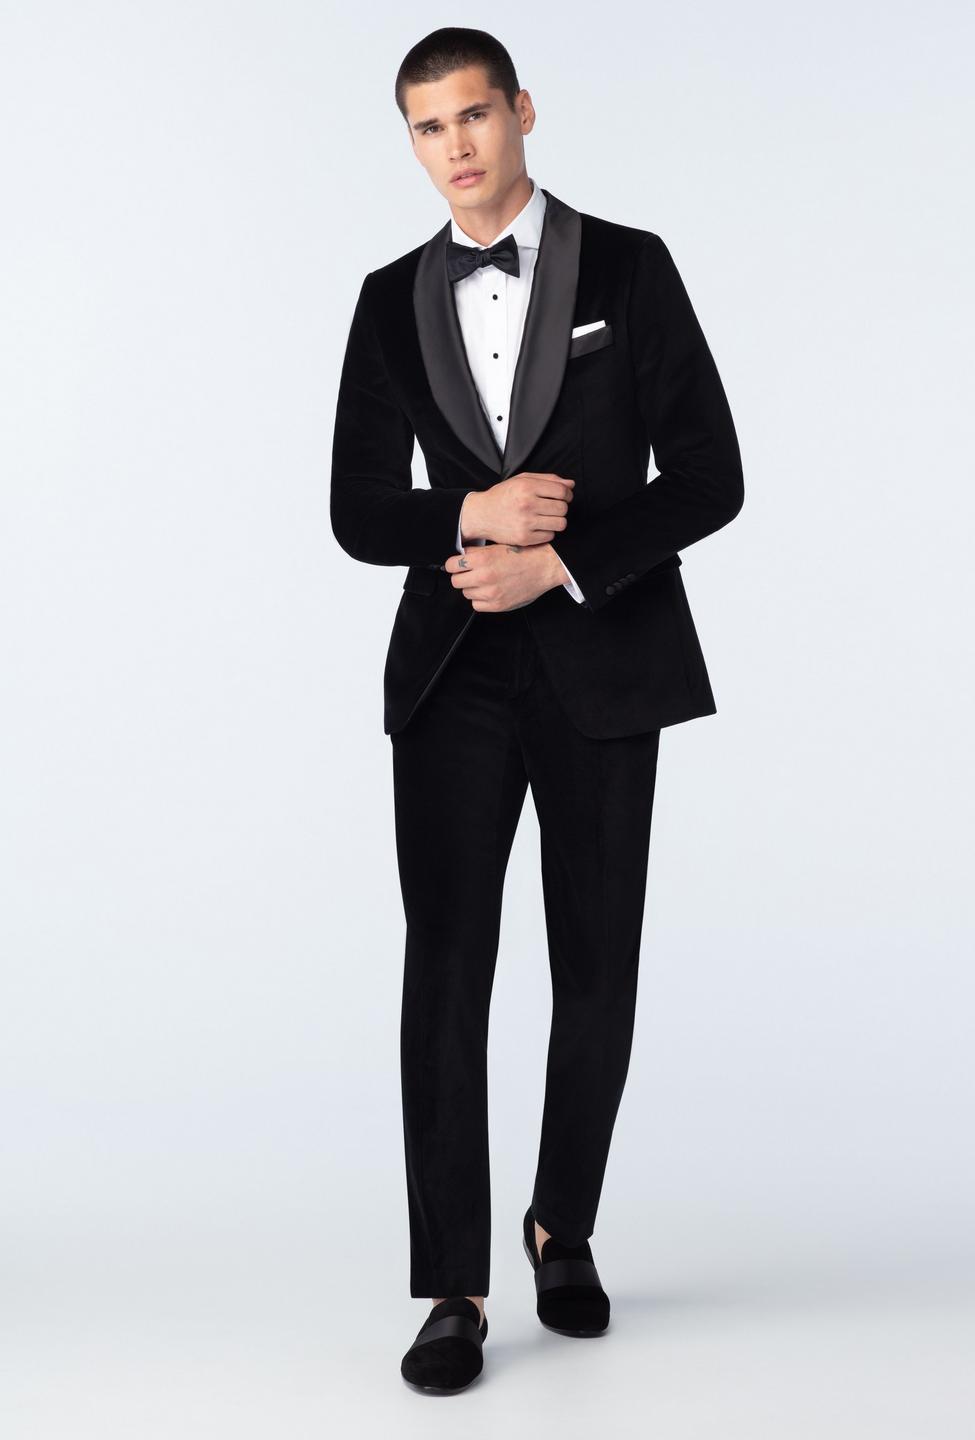 Black suit - Harford Solid Design from Tuxedo Indochino Collection